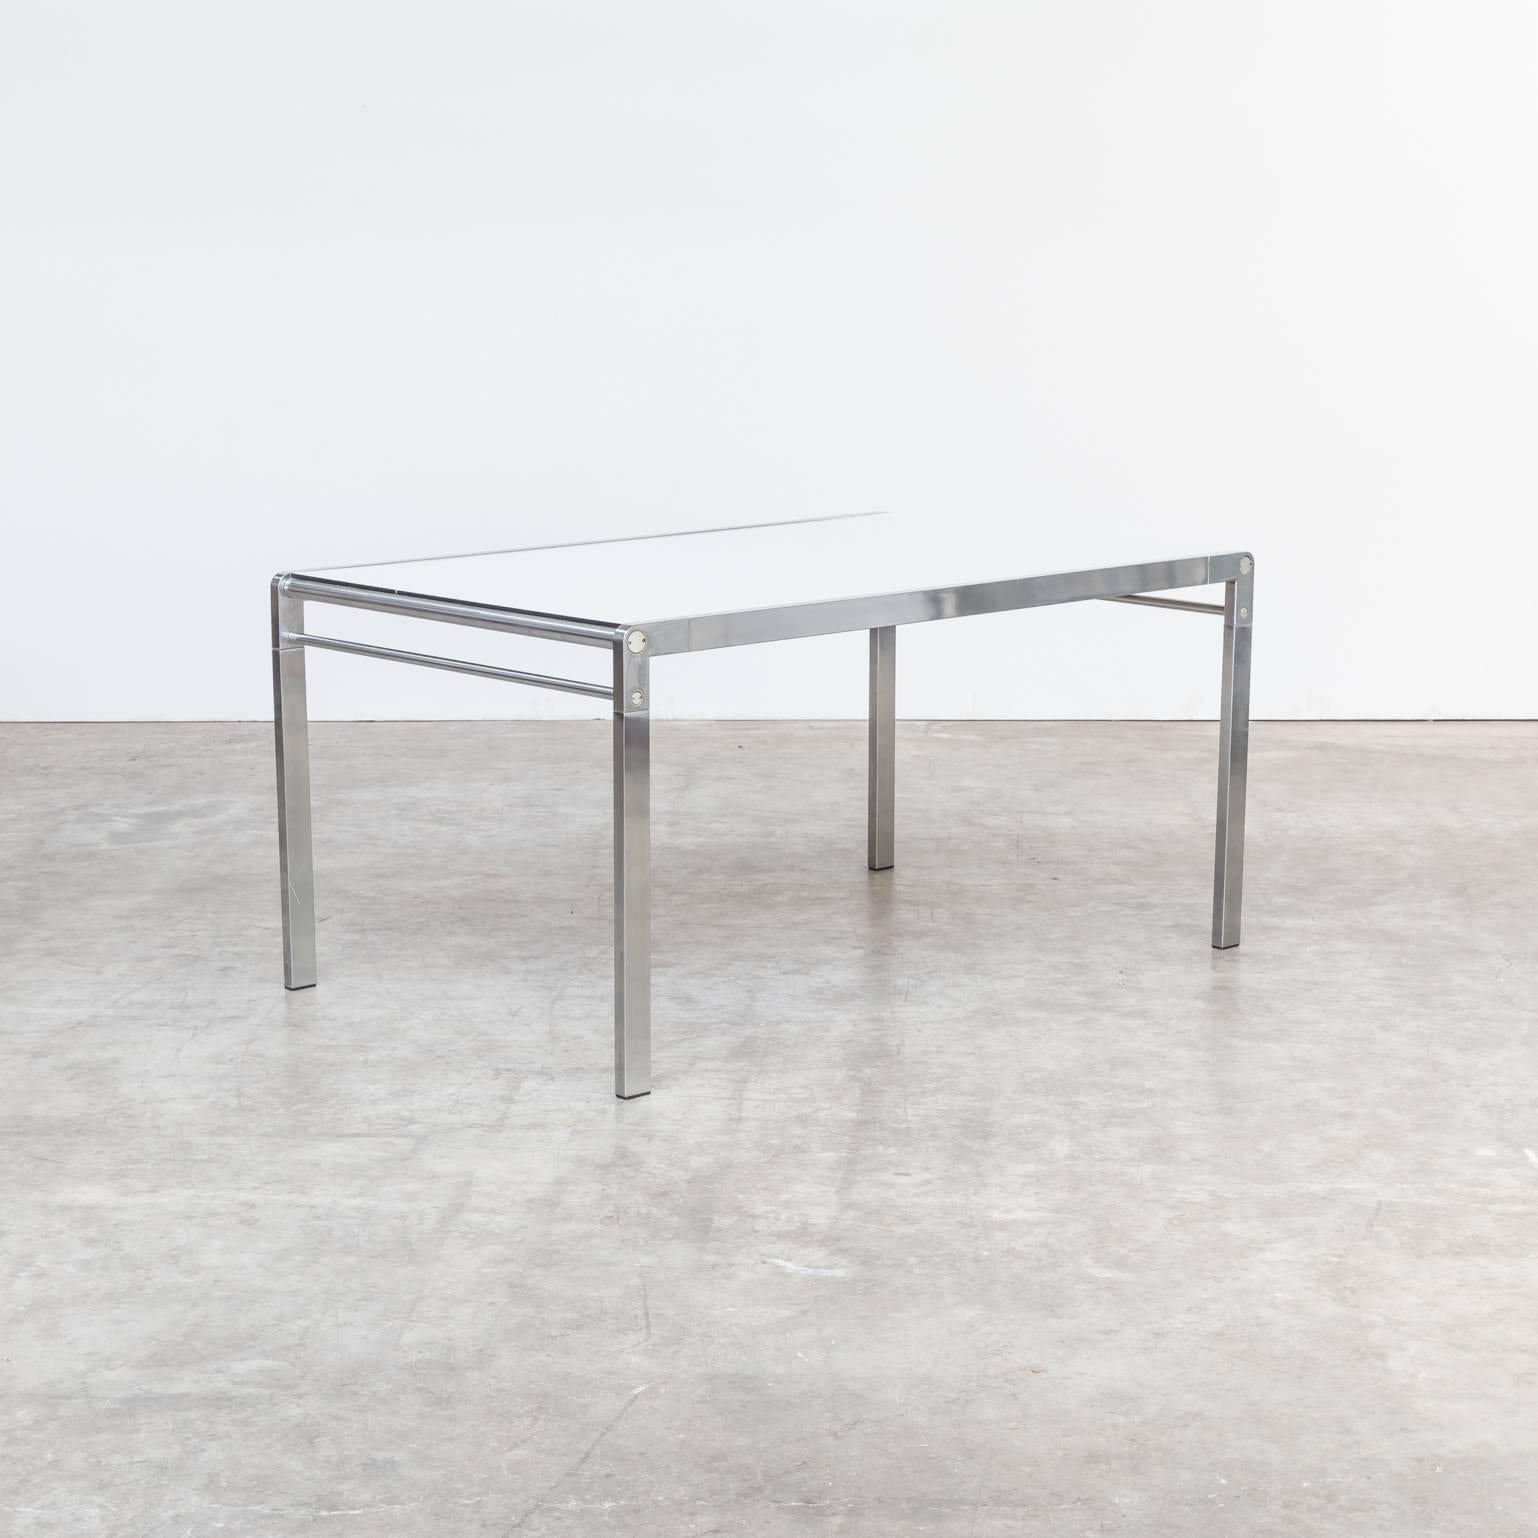 Paul Ibens & Claire Bataille TE 21 dining table for ’t Spectrum. Good condition wear consistent with age and use.